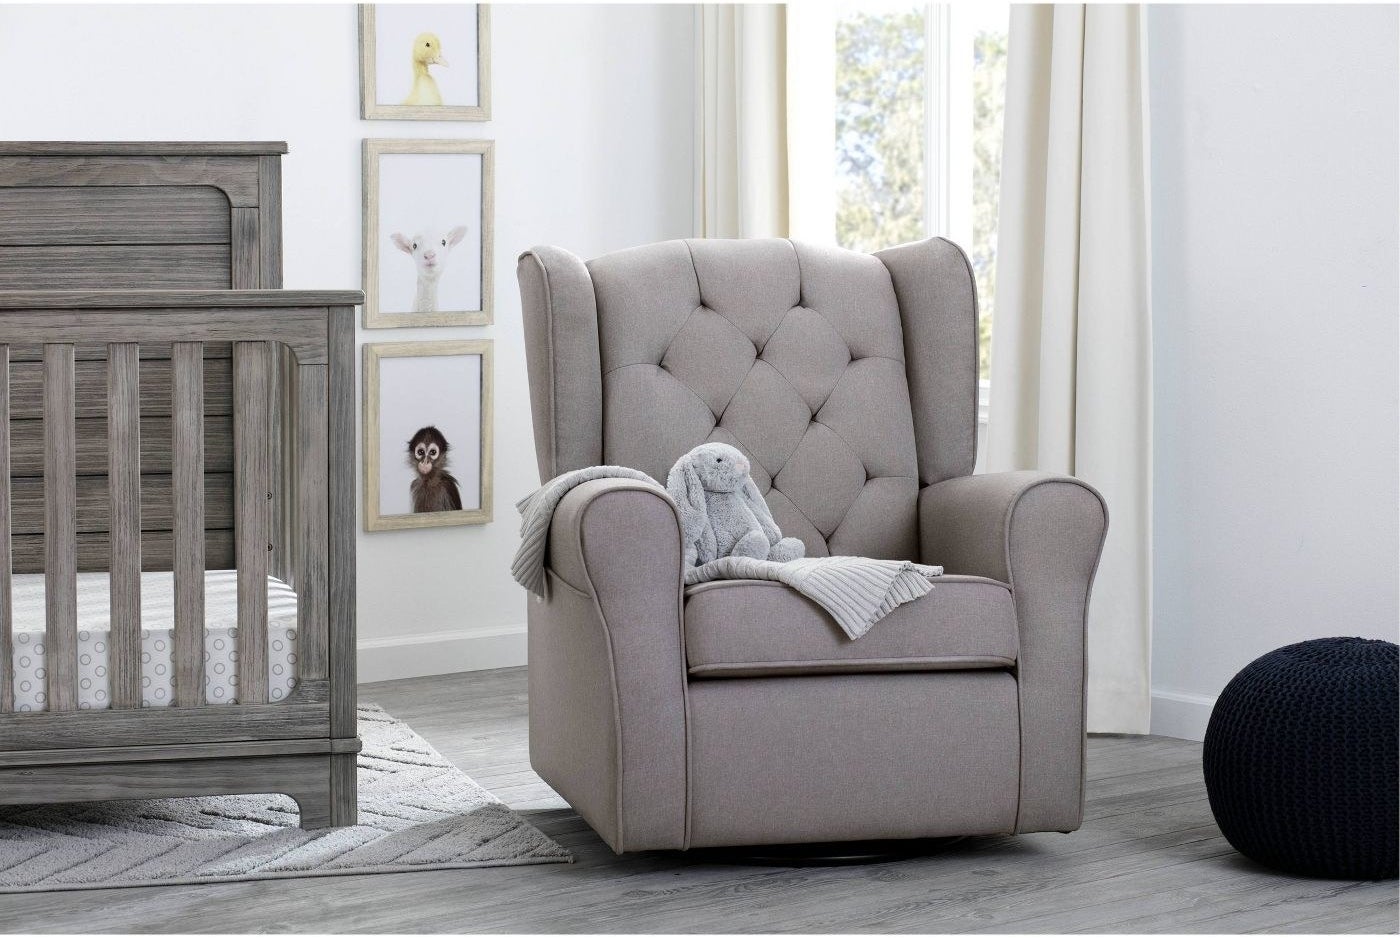 the grey armchair in a grey decorated nursery